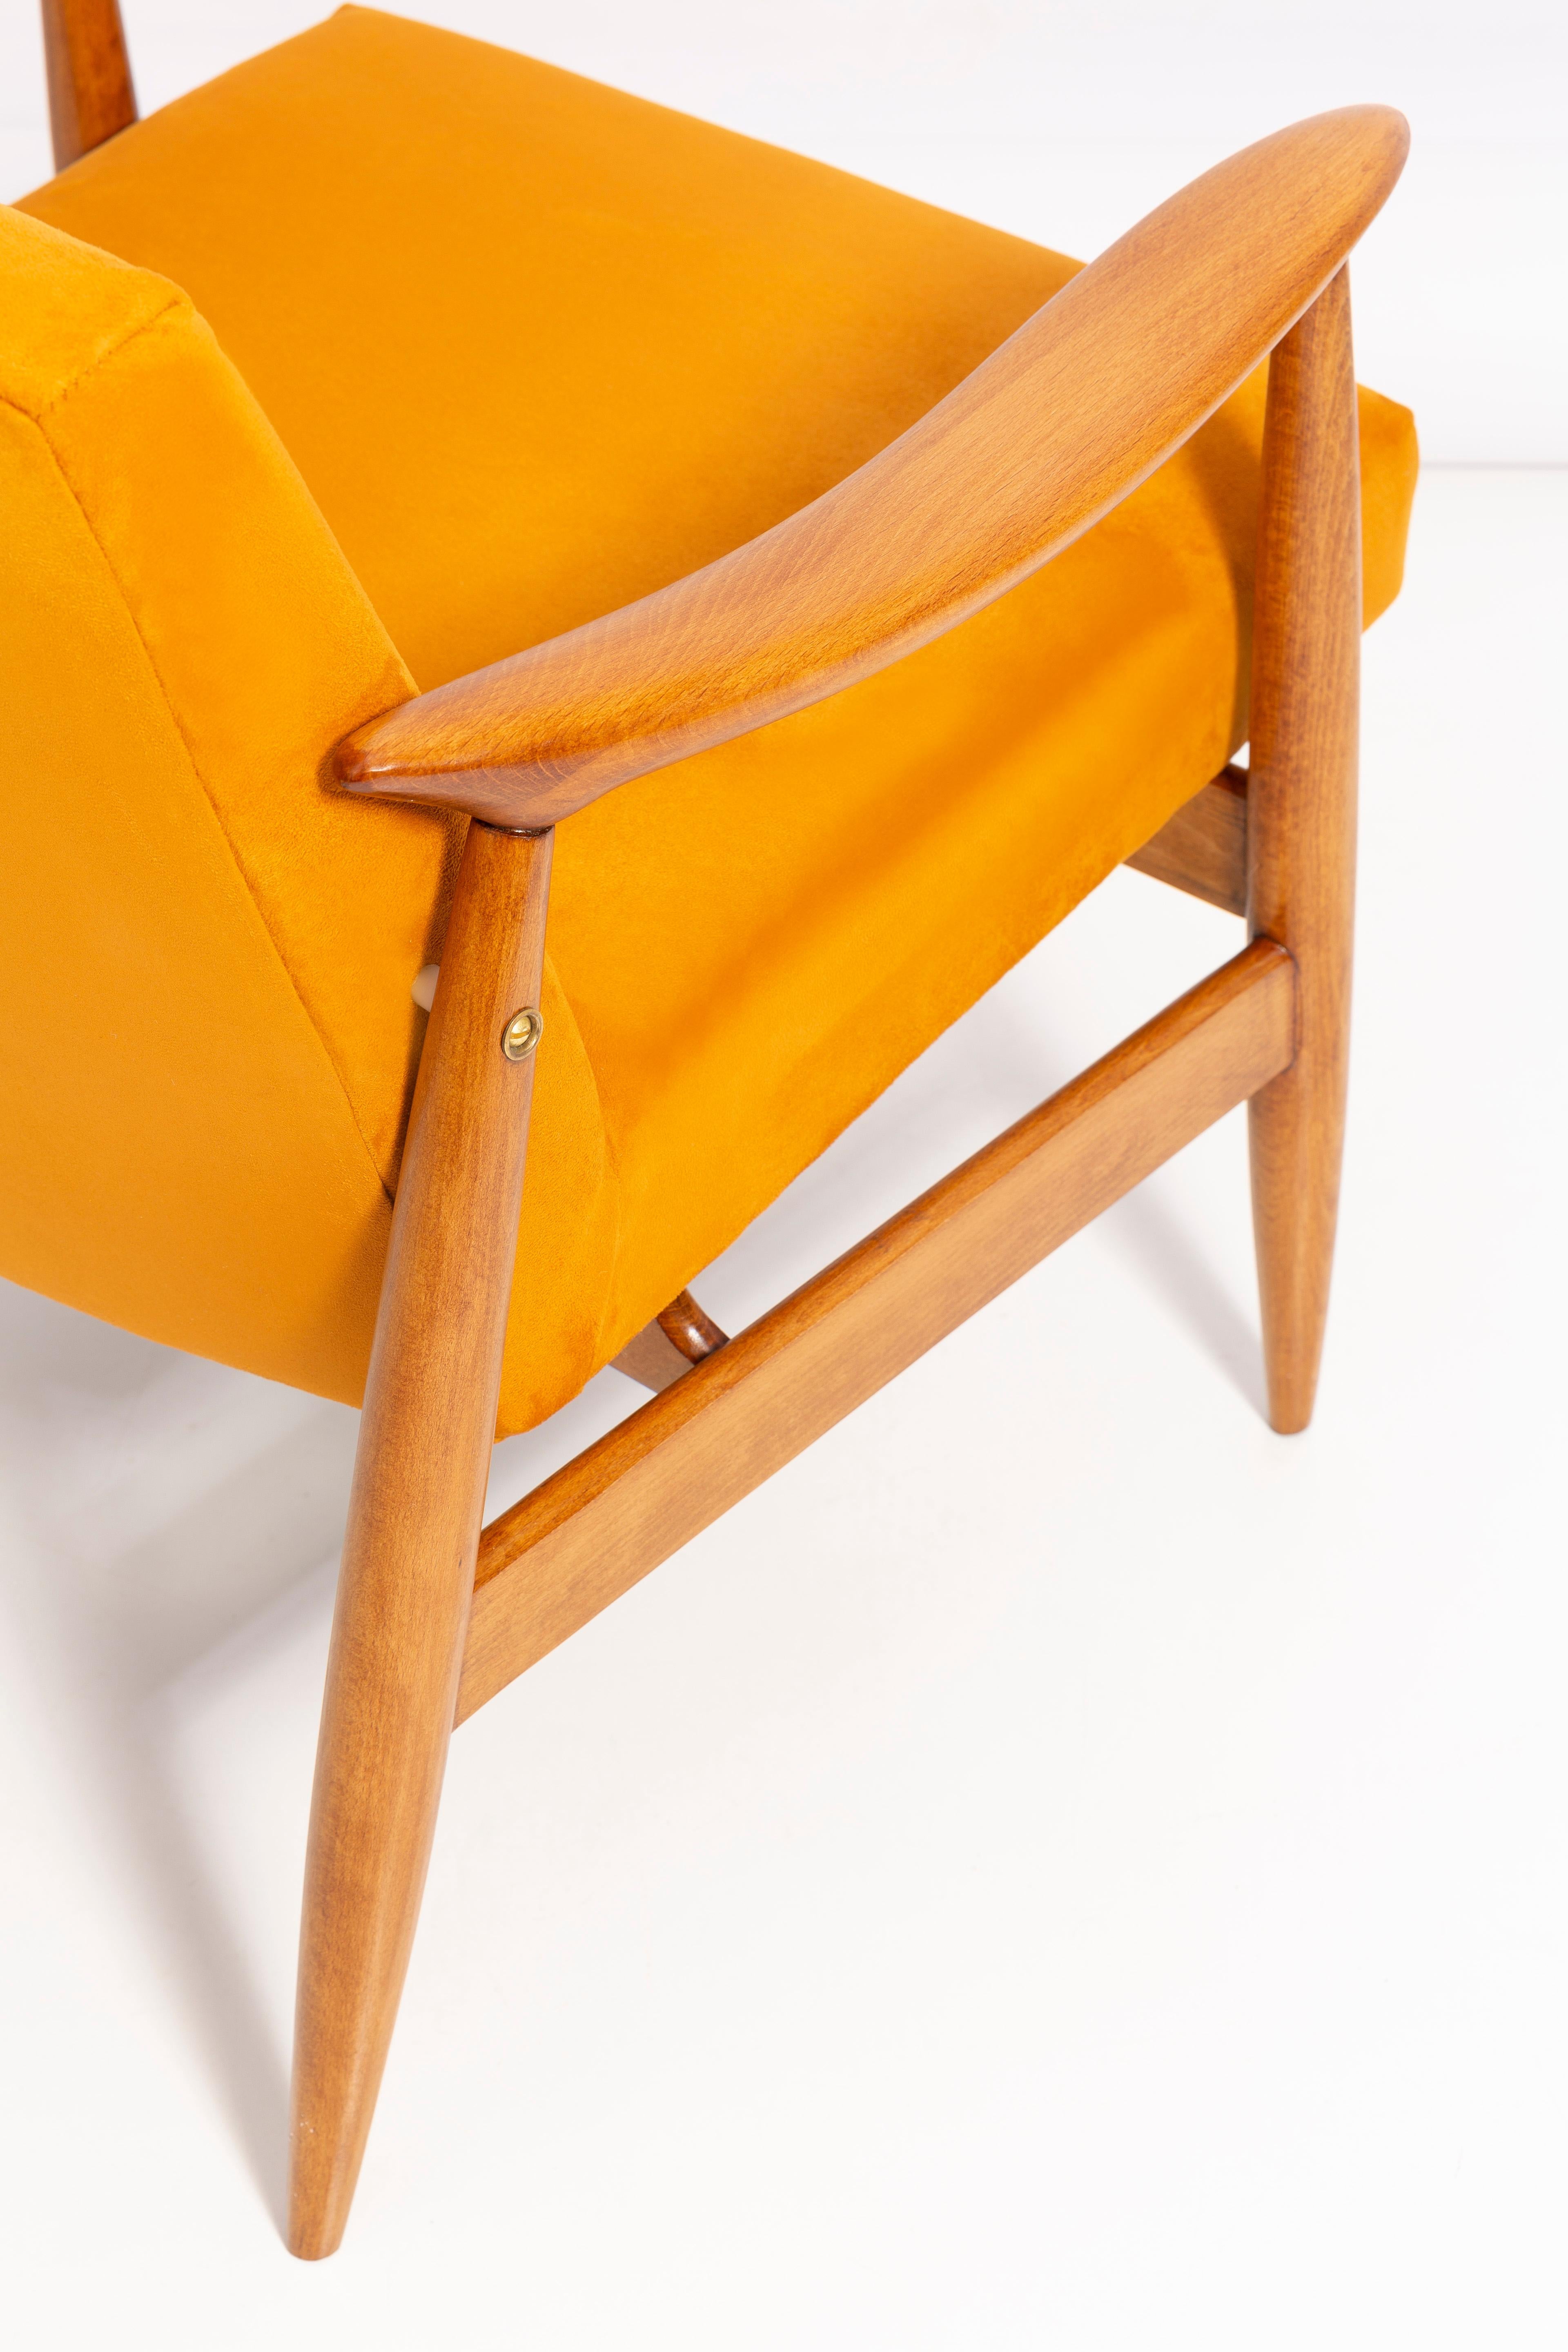 Pair of Mid Century Yellow Armchairs, Designed by J. Kedziorek, Poland, 1960s For Sale 6